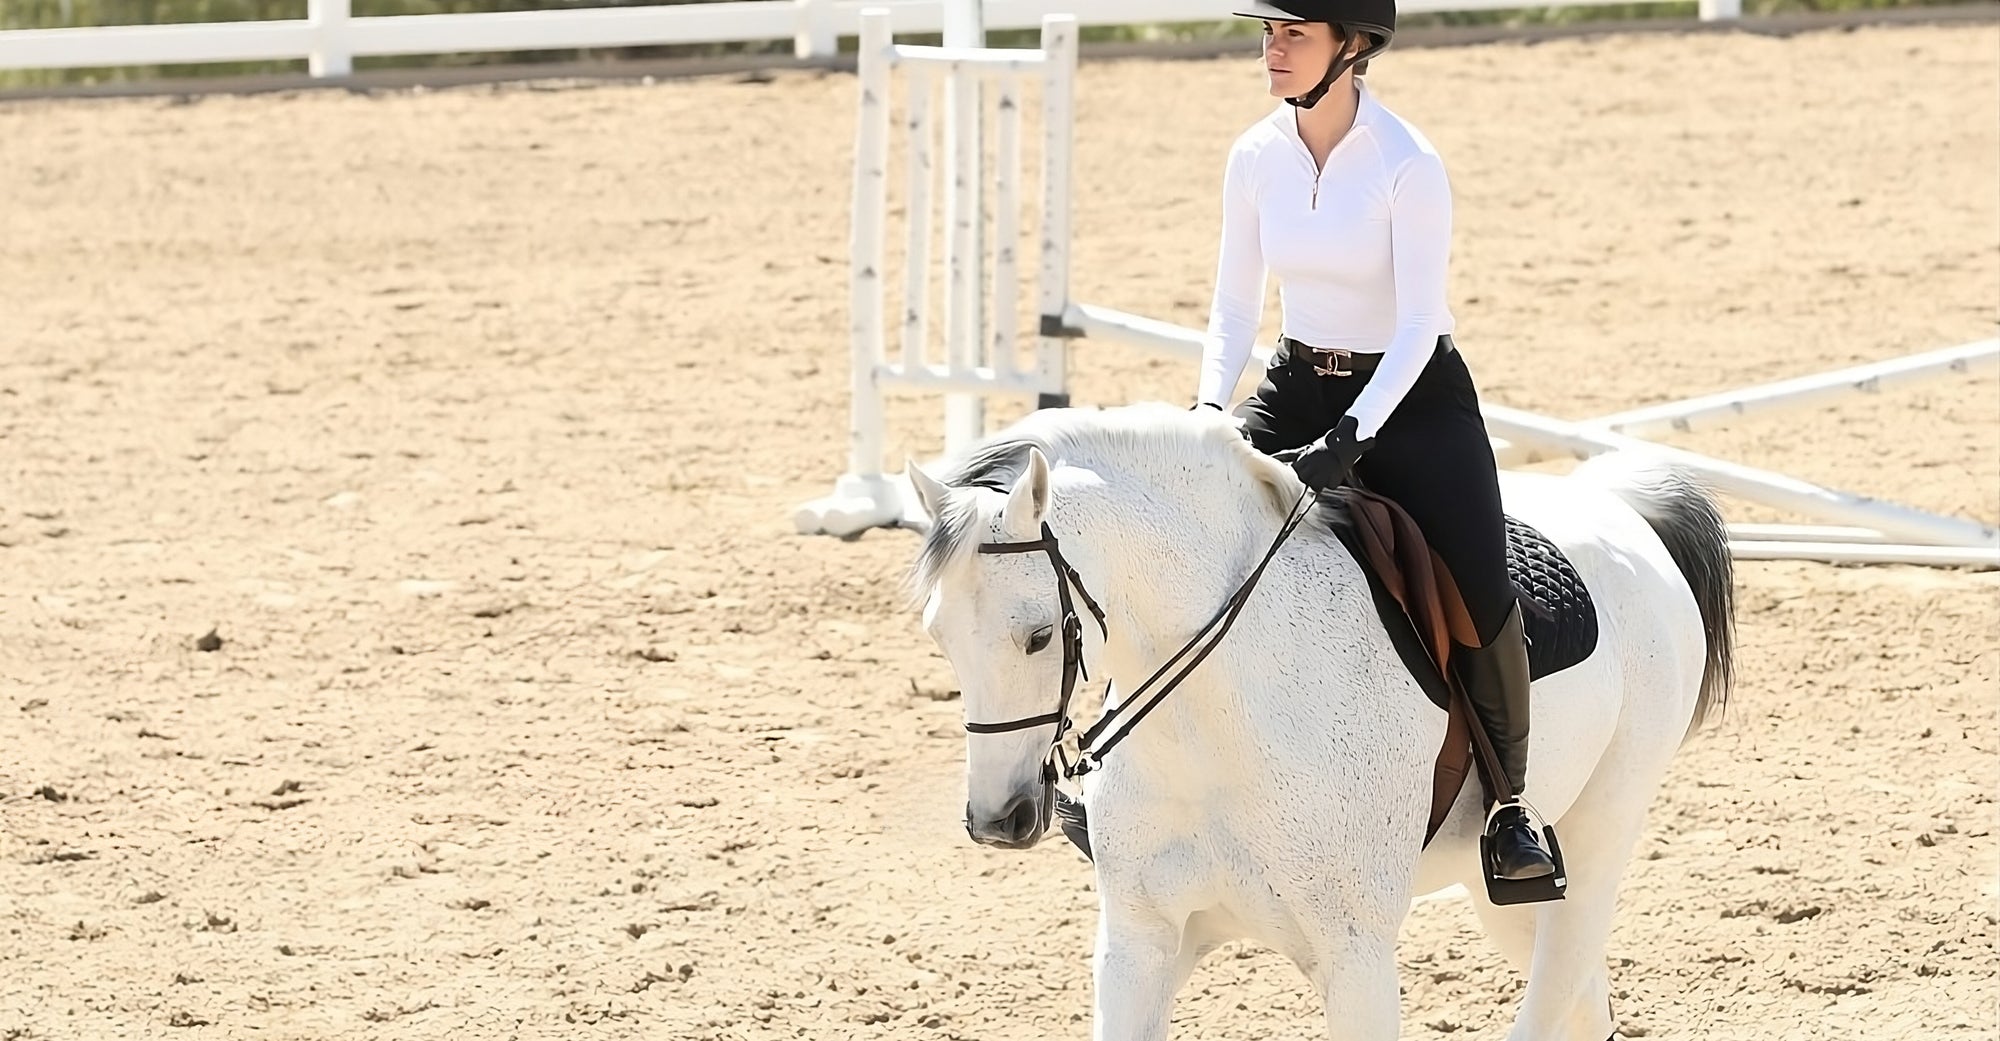 Girl in white sunshirt and black breeches trots on a grey horse in an arena.